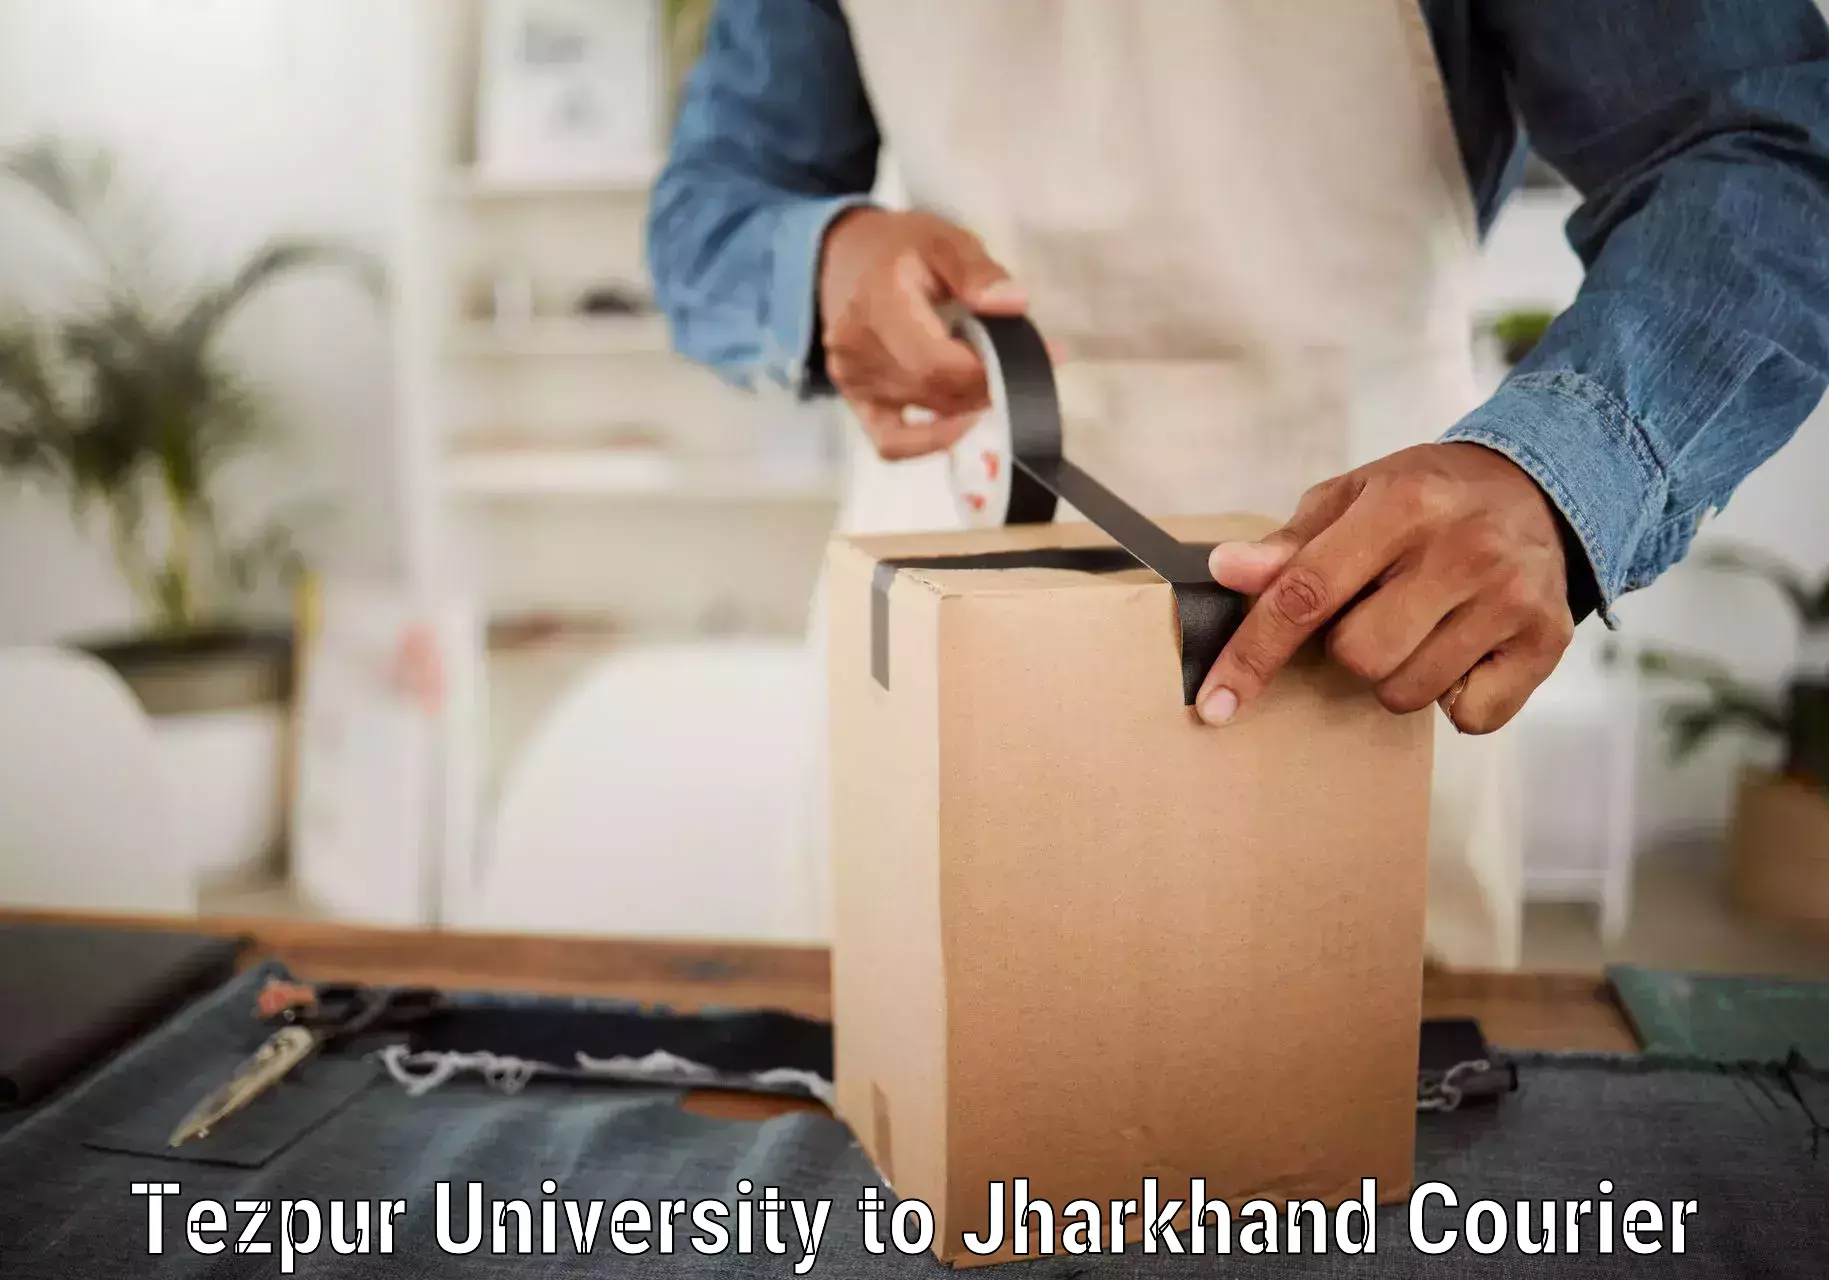 Express package delivery in Tezpur University to Manoharpur